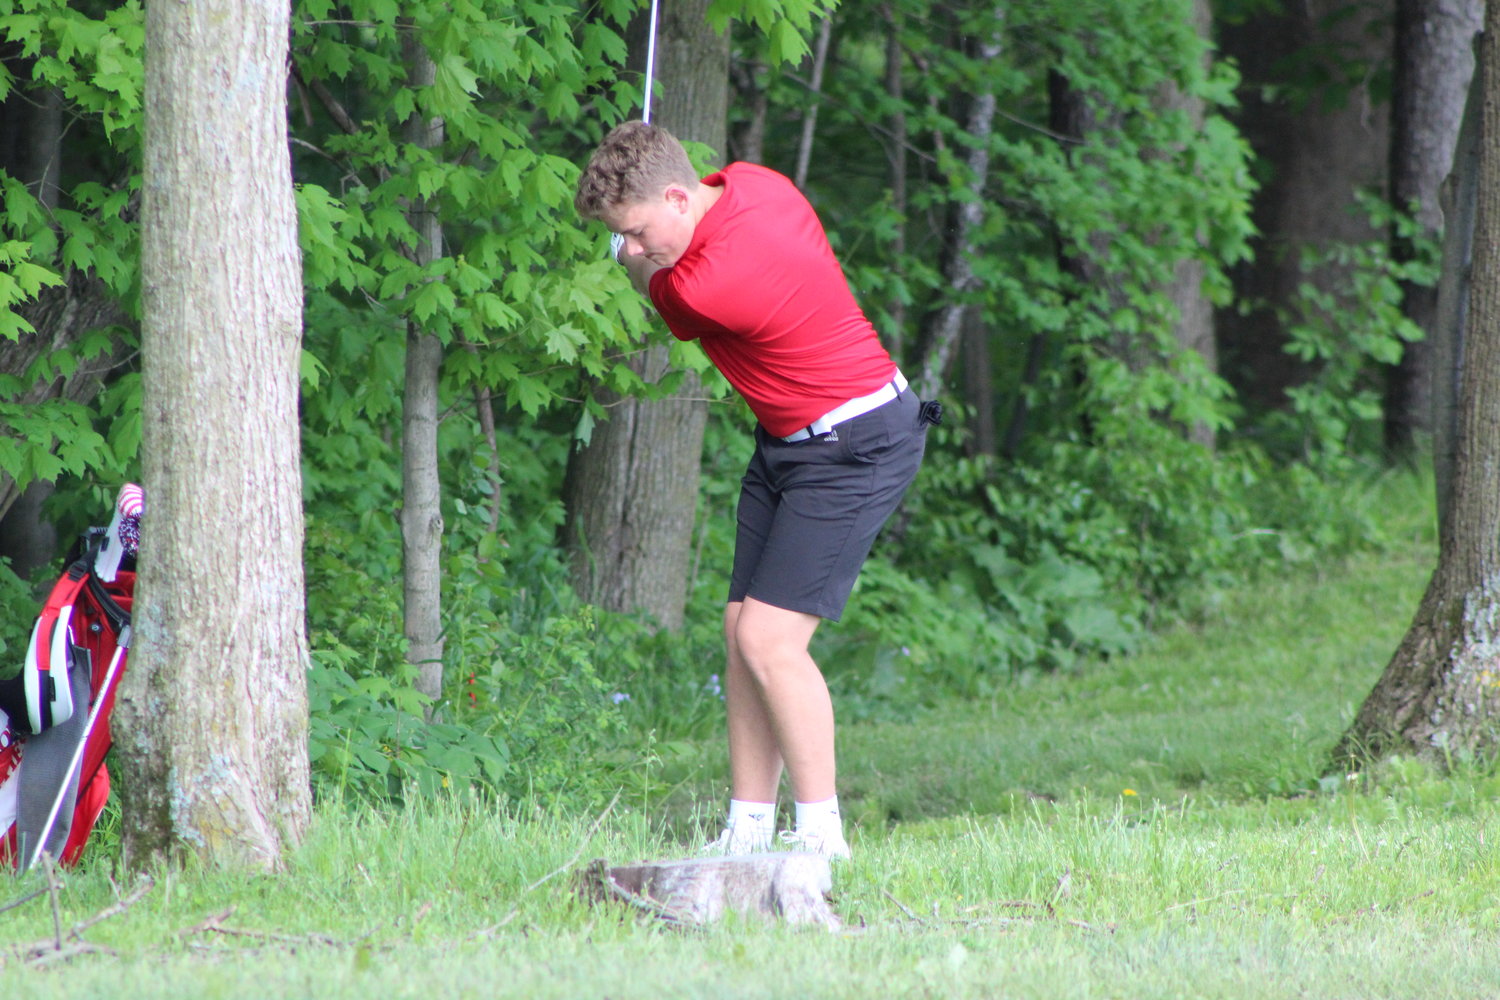 Harrison Haddock earned a spot on the All-SAC first team with his 85.